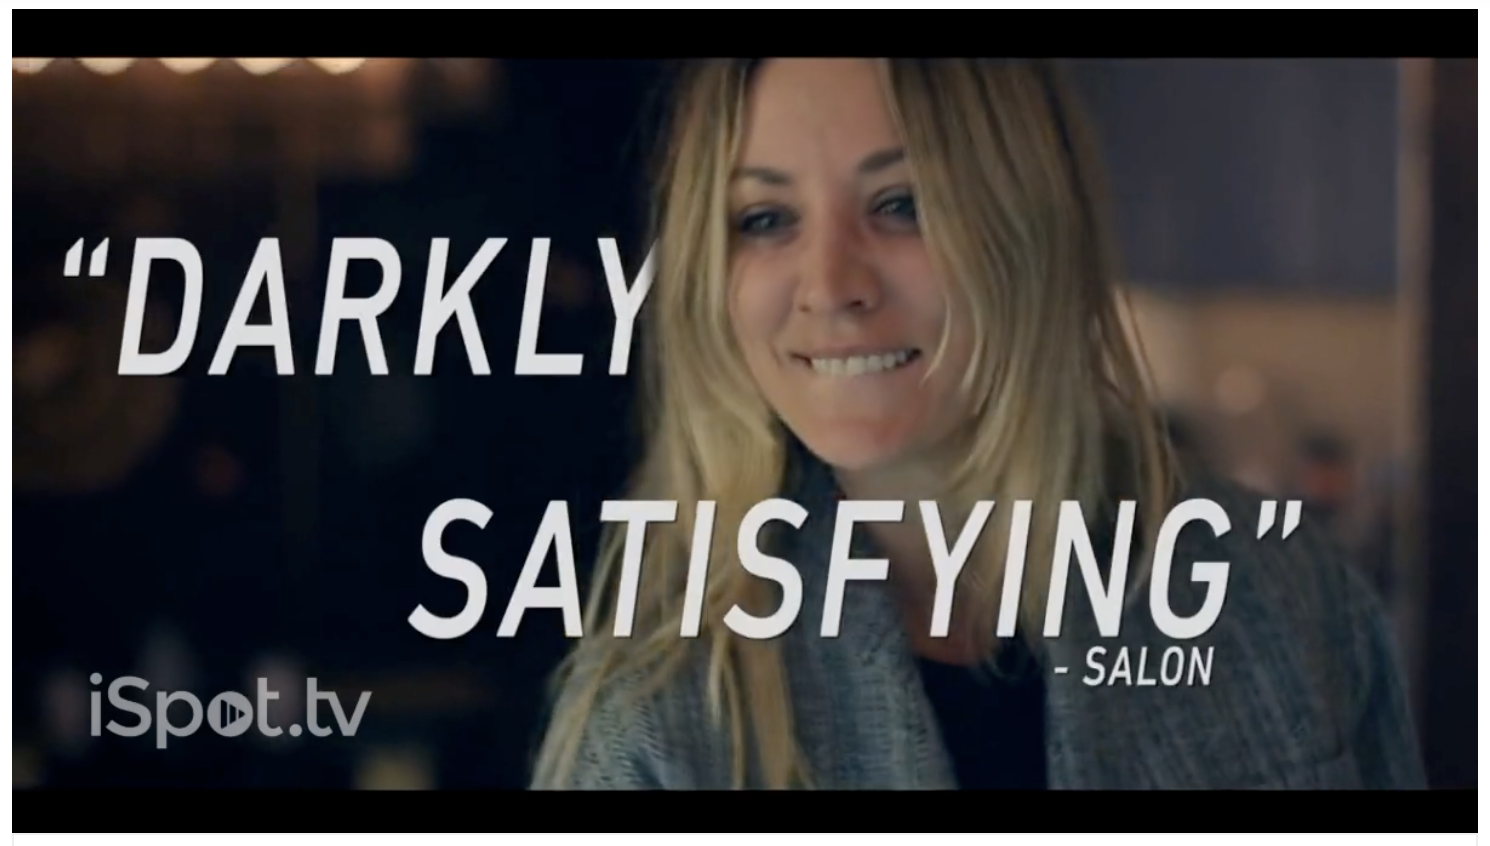 A screenshot of HBO’s trailer for their show The Flight Attendant depicts actress (and show star) Kaley Cuoco smiling. The words “Darkly satisfying - Salon” are wrapped around her. 